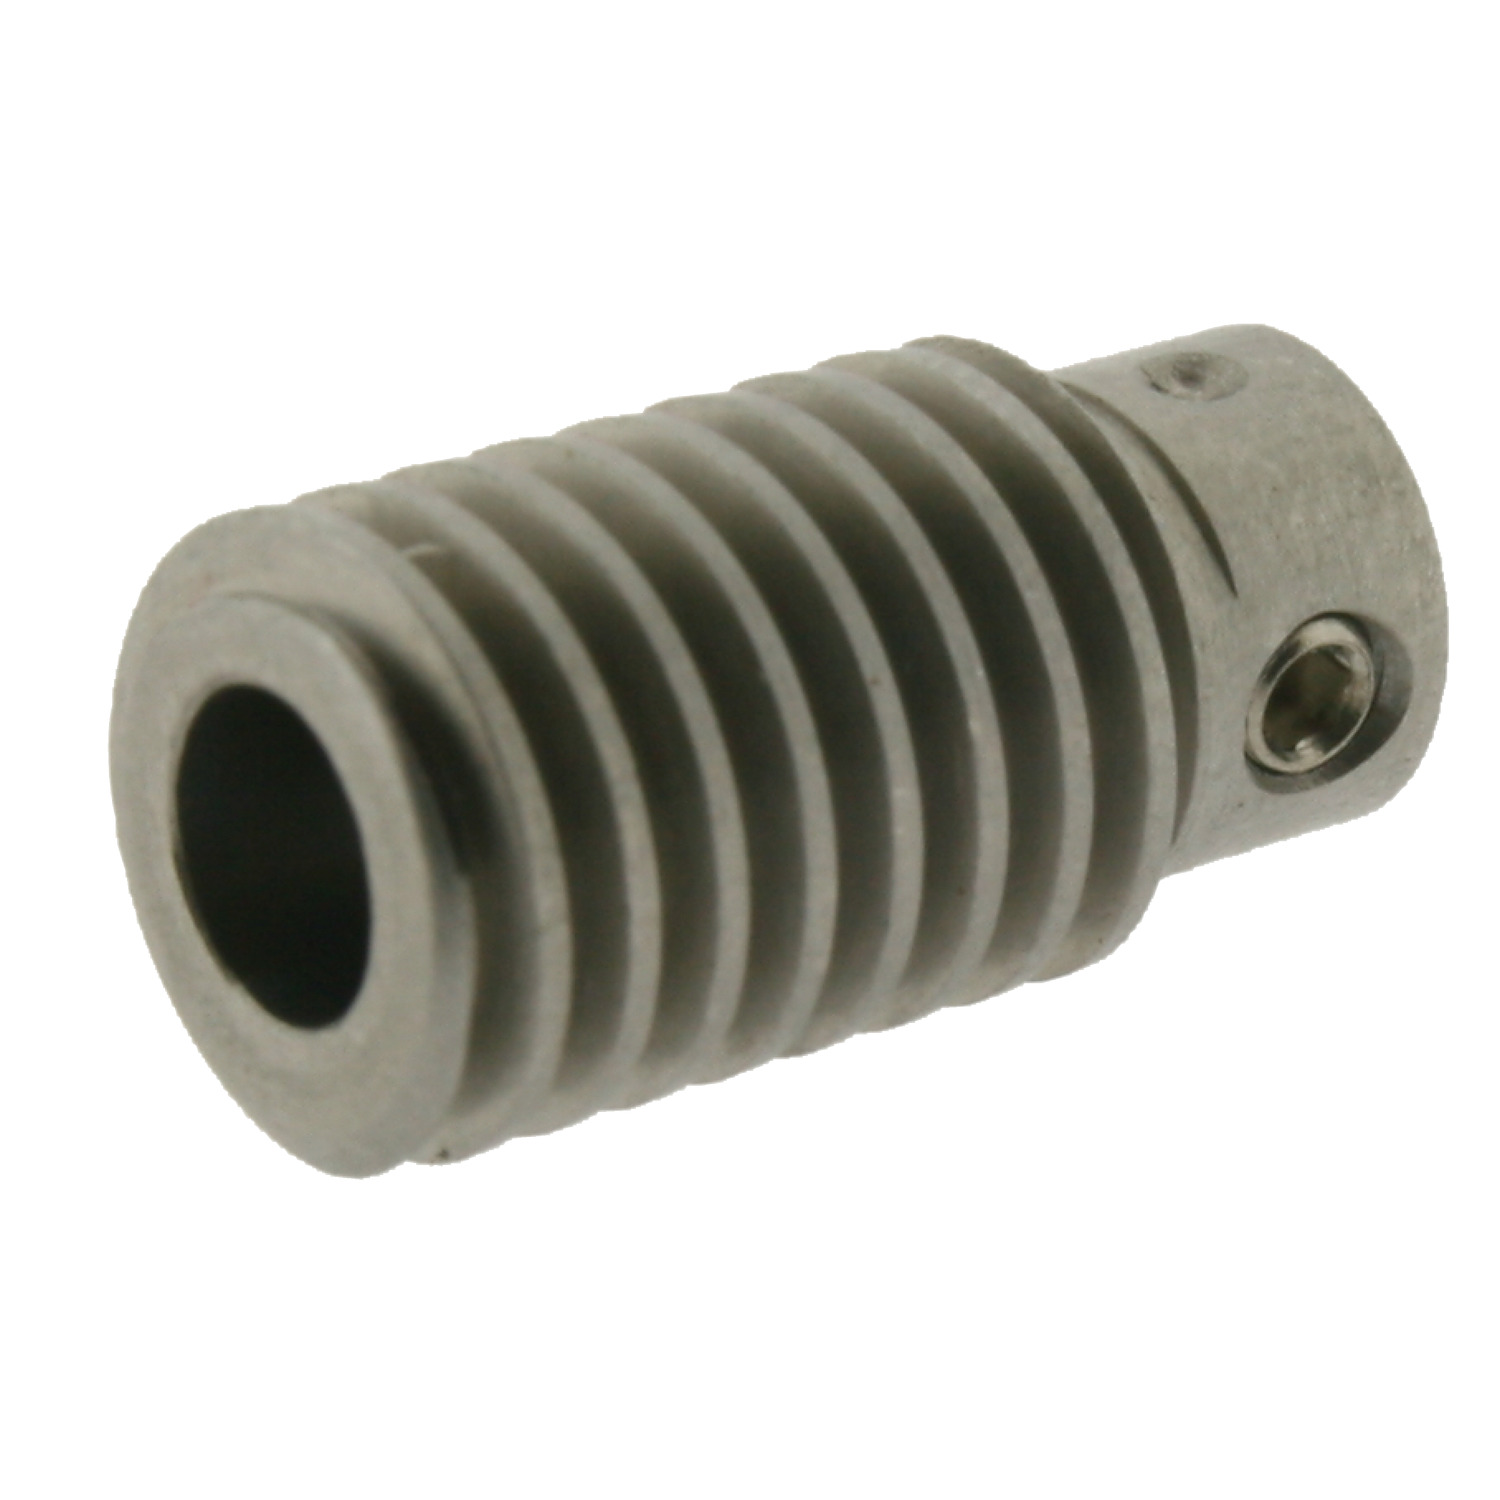 Product R2144, 0,5 Module Precision Worms stainless steel / 